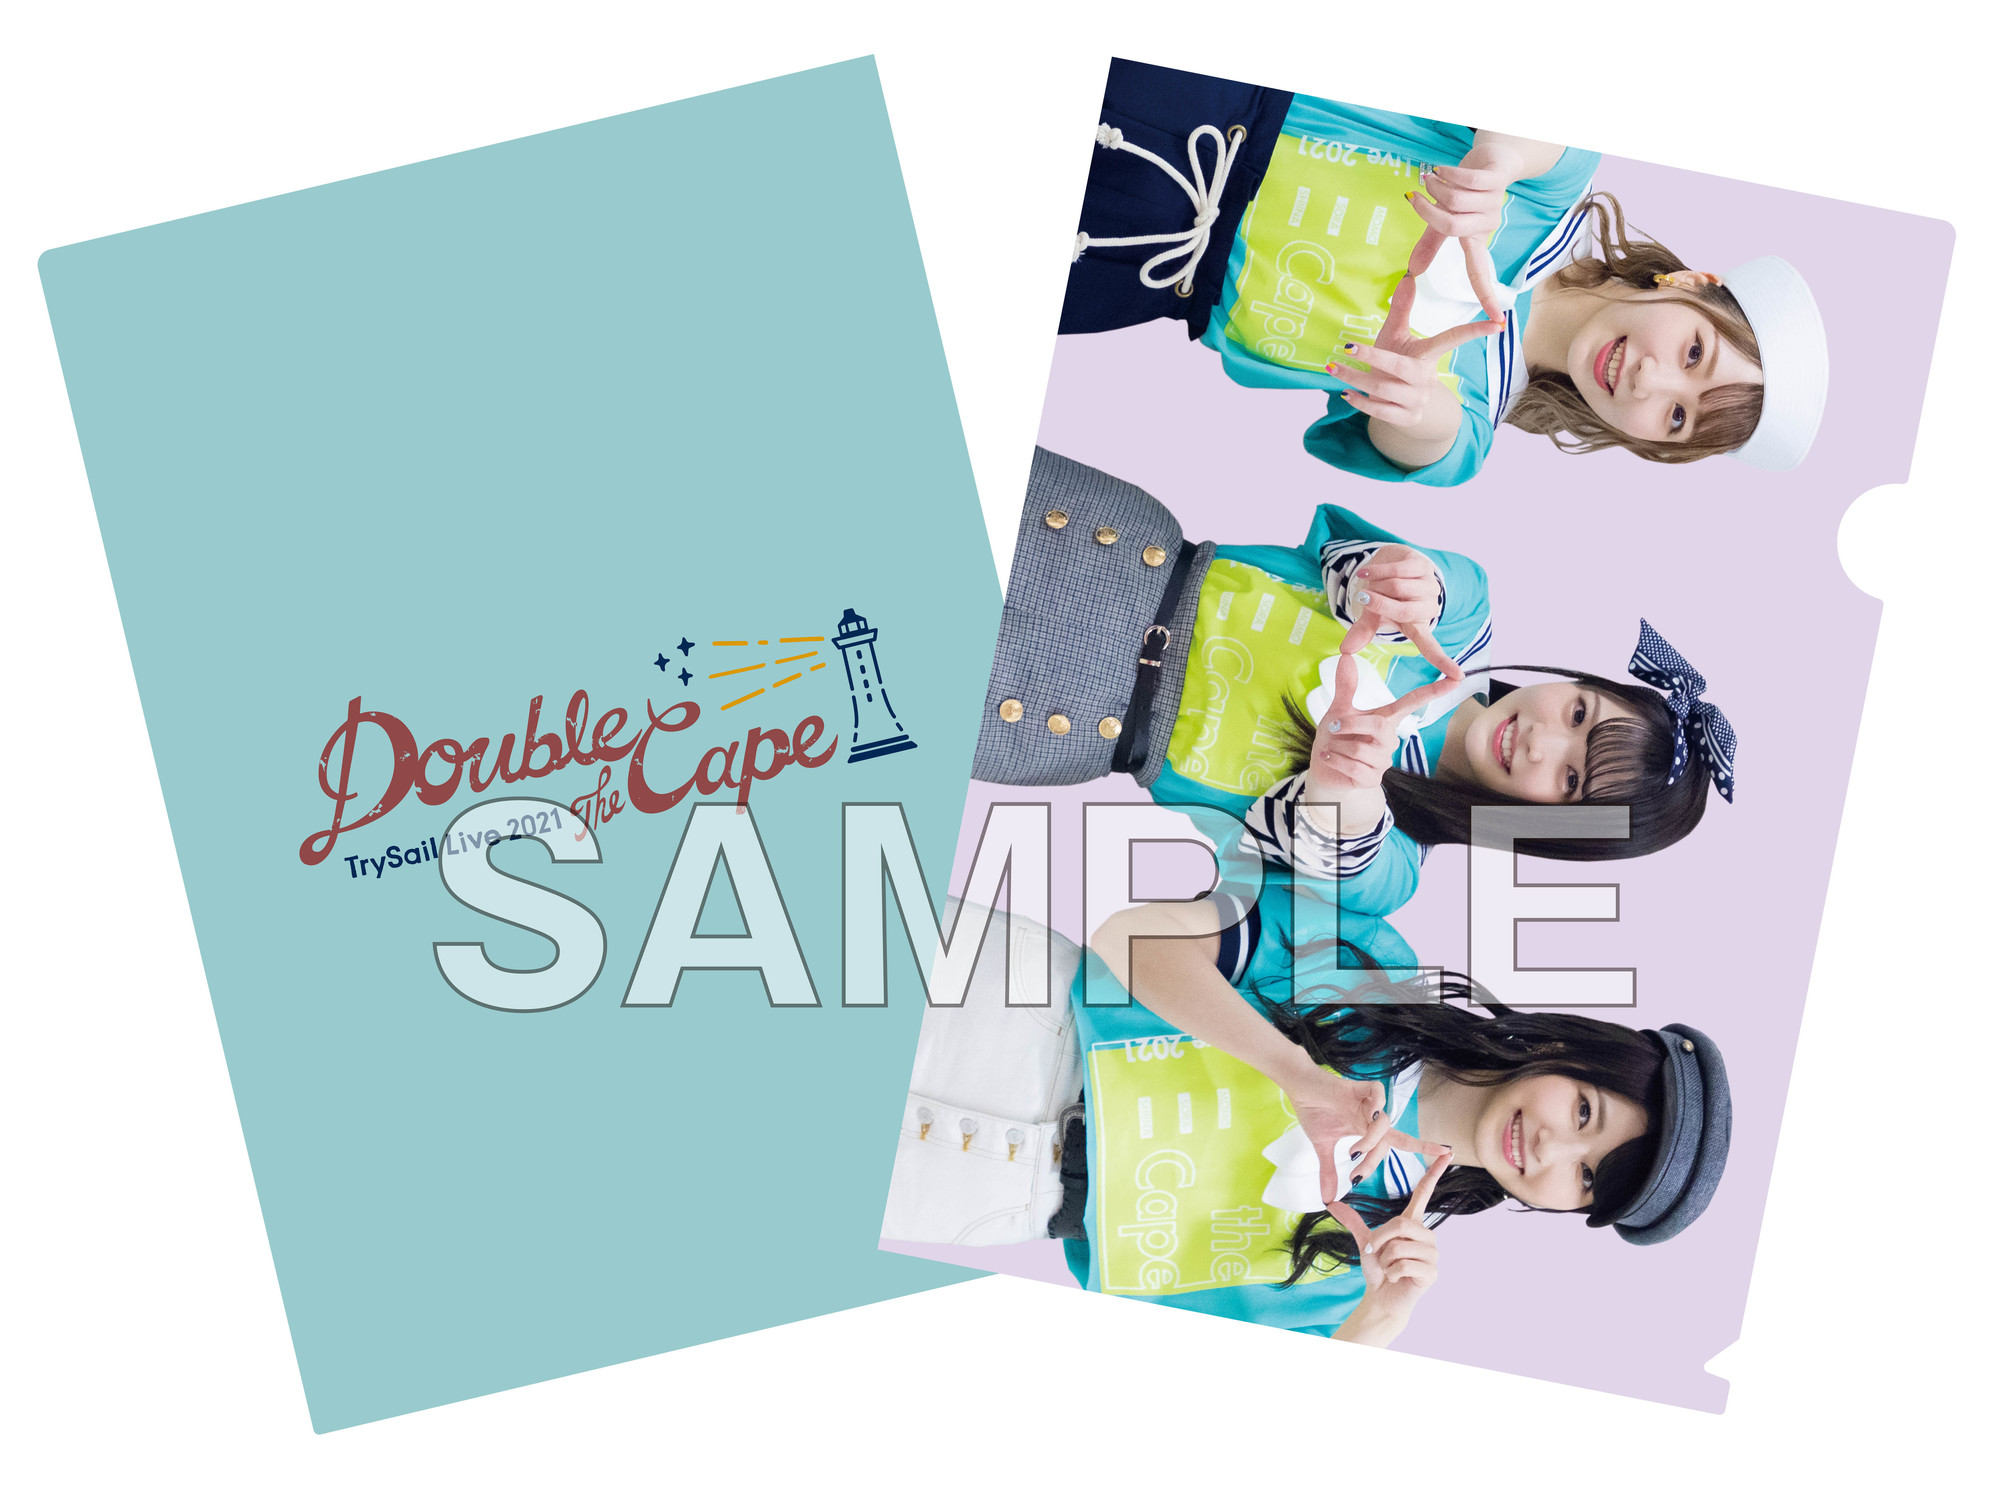 TrySail 8/4発売「TrySail Live 2021 “Double the Cape”」ジャケット